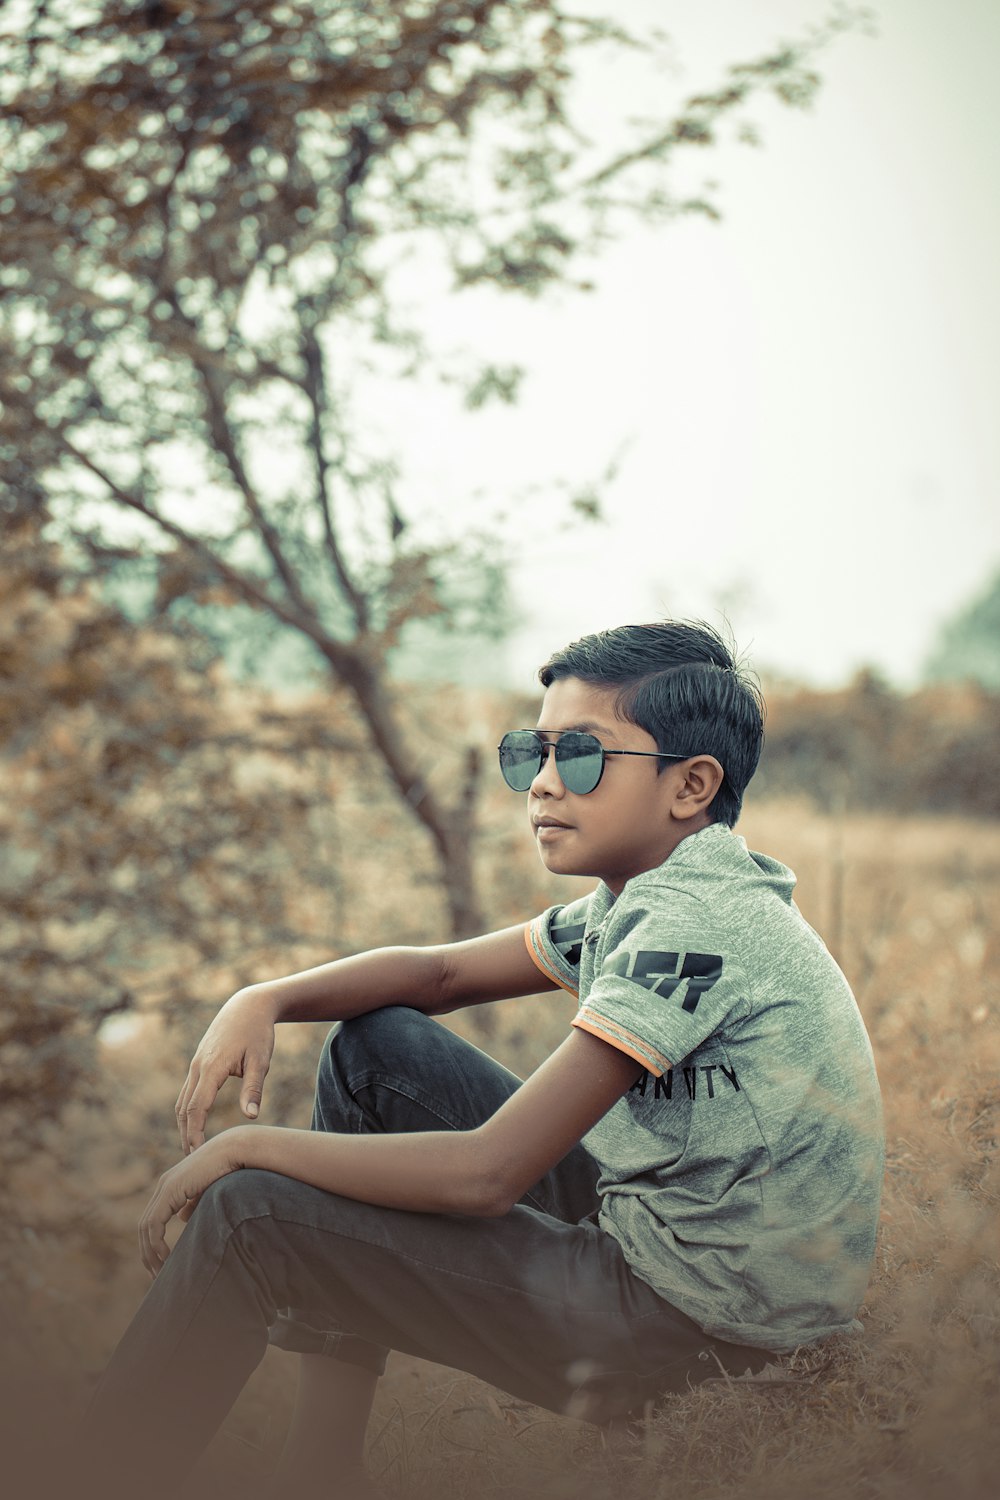 a young boy sitting in a field with a tree in the background